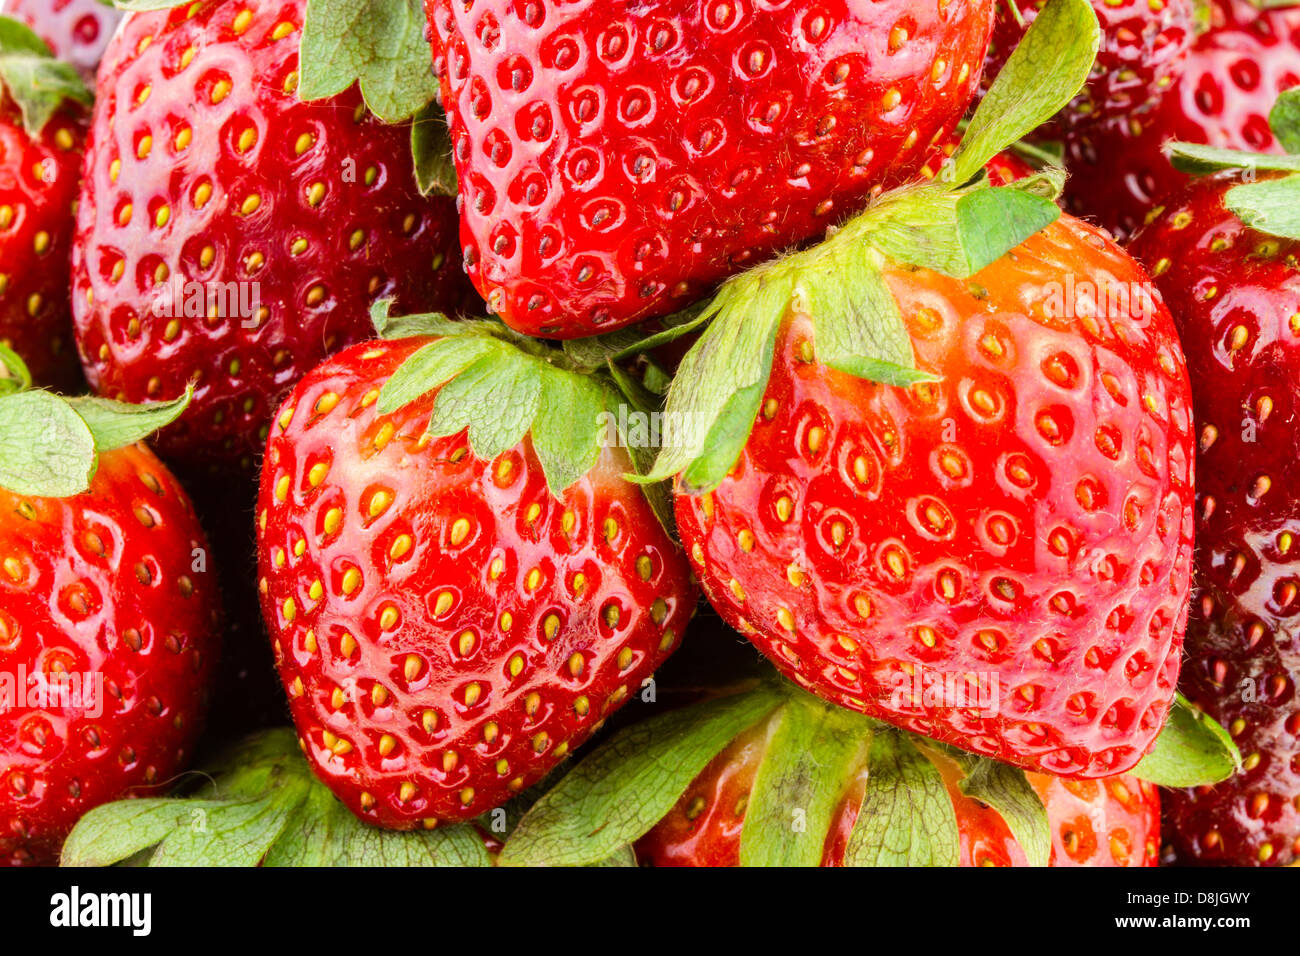 A group of ripe strawberries. Stock Photo